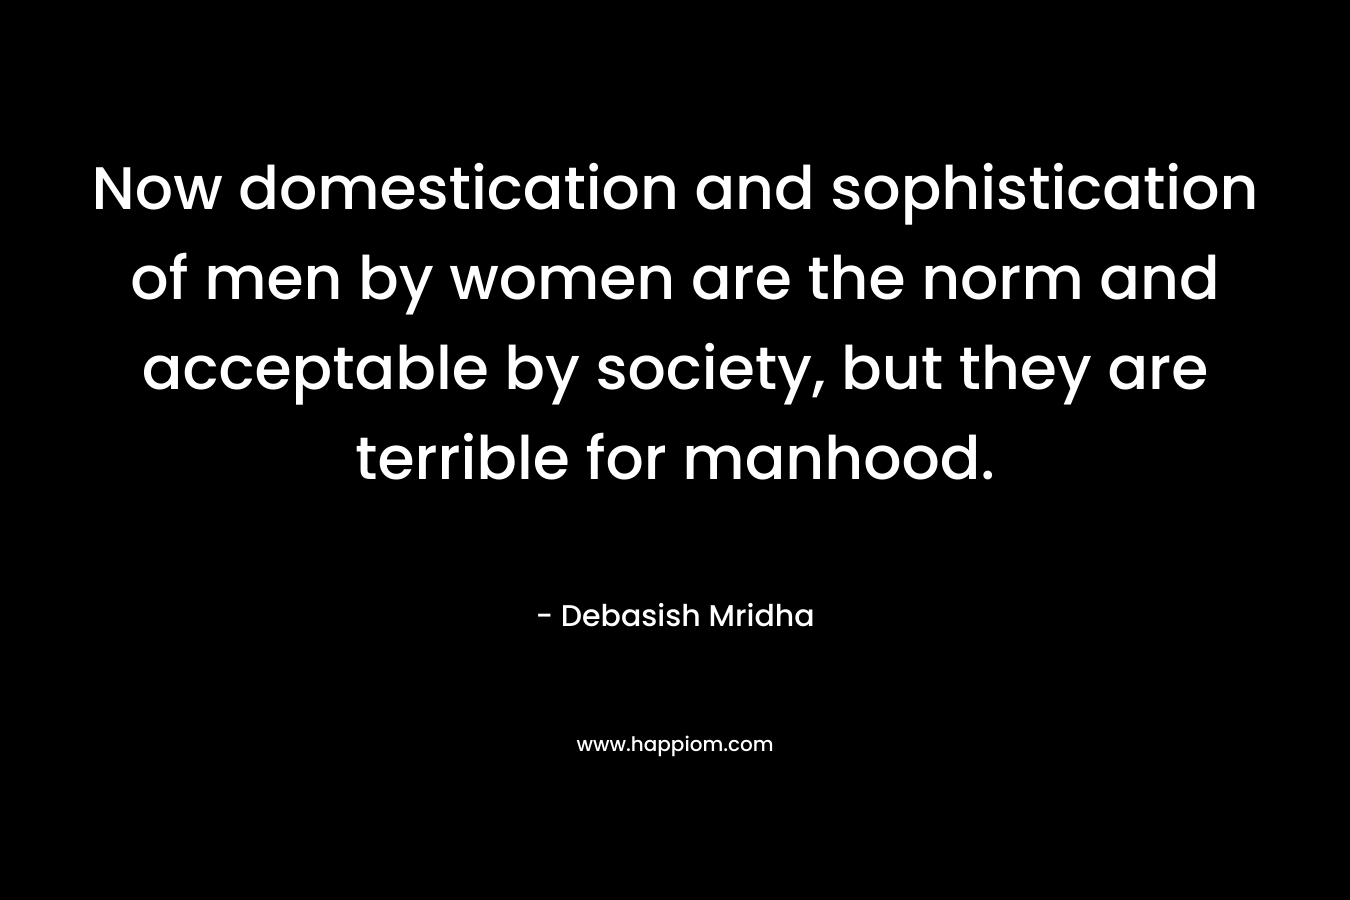 Now domestication and sophistication of men by women are the norm and acceptable by society, but they are terrible for manhood.